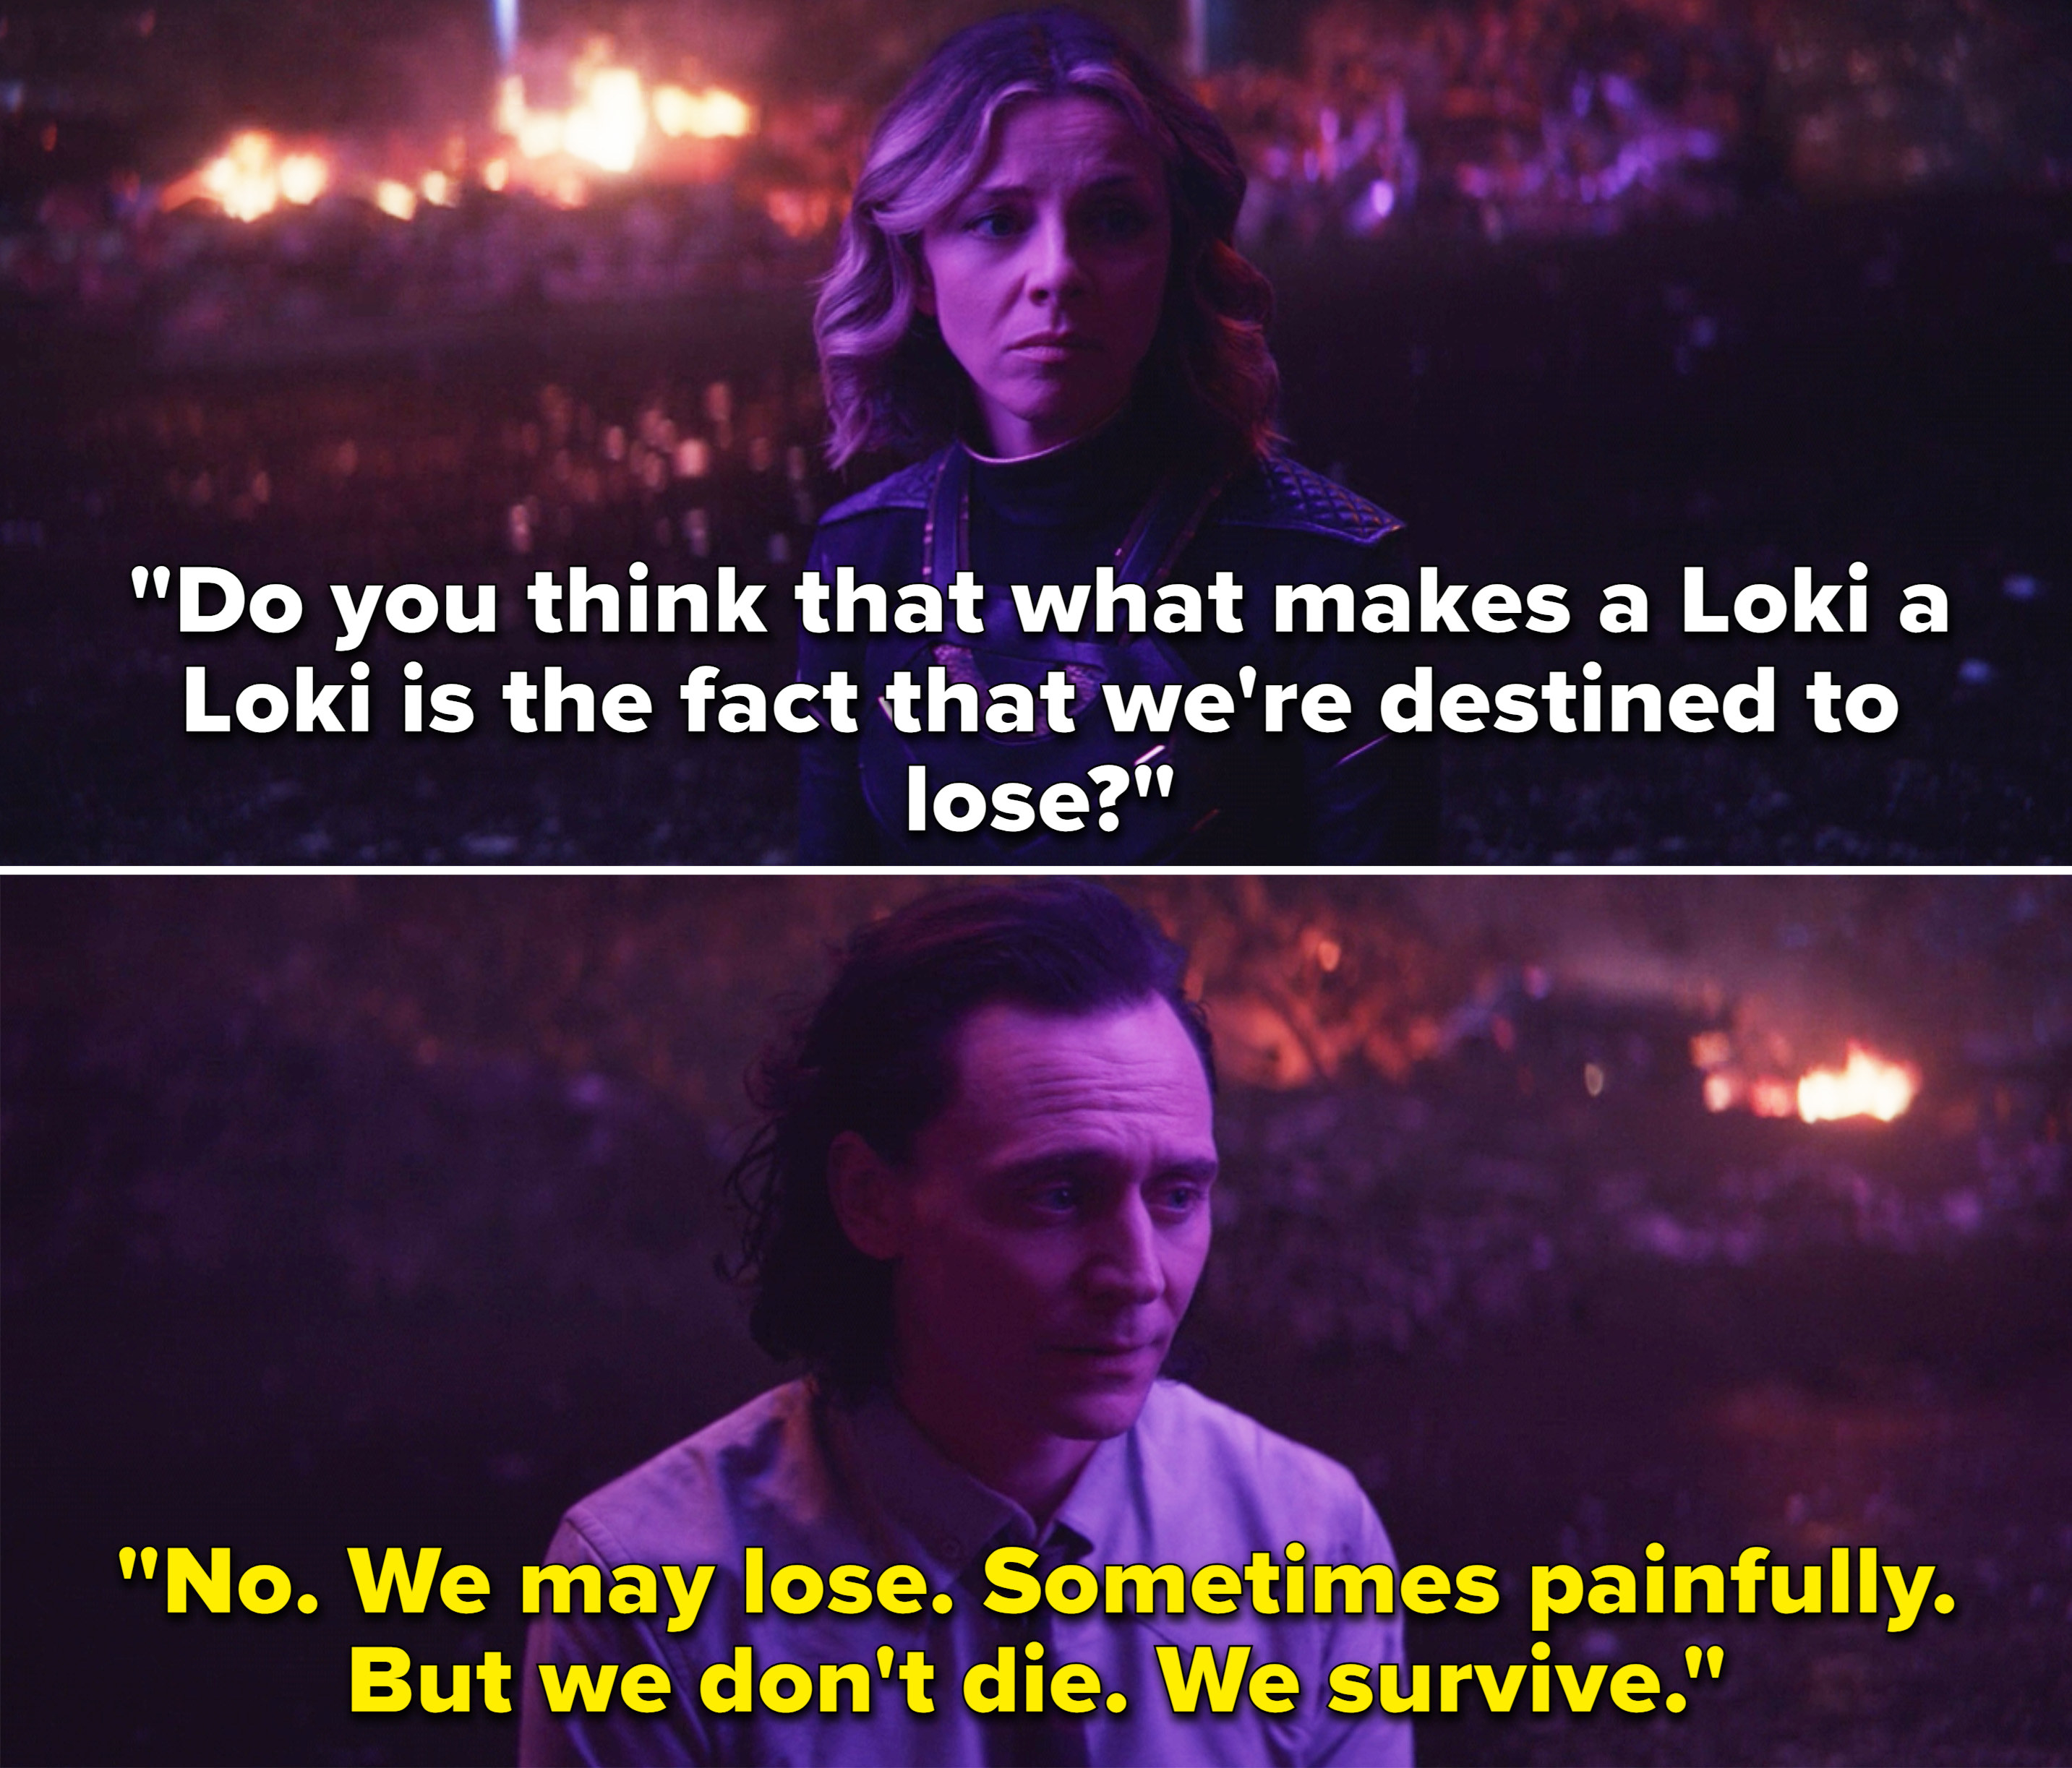 Sylvie asking Loki, &quot;Do you think that what makes a Loki a Loki is the fact that we&#x27;re destined to lose?&quot;